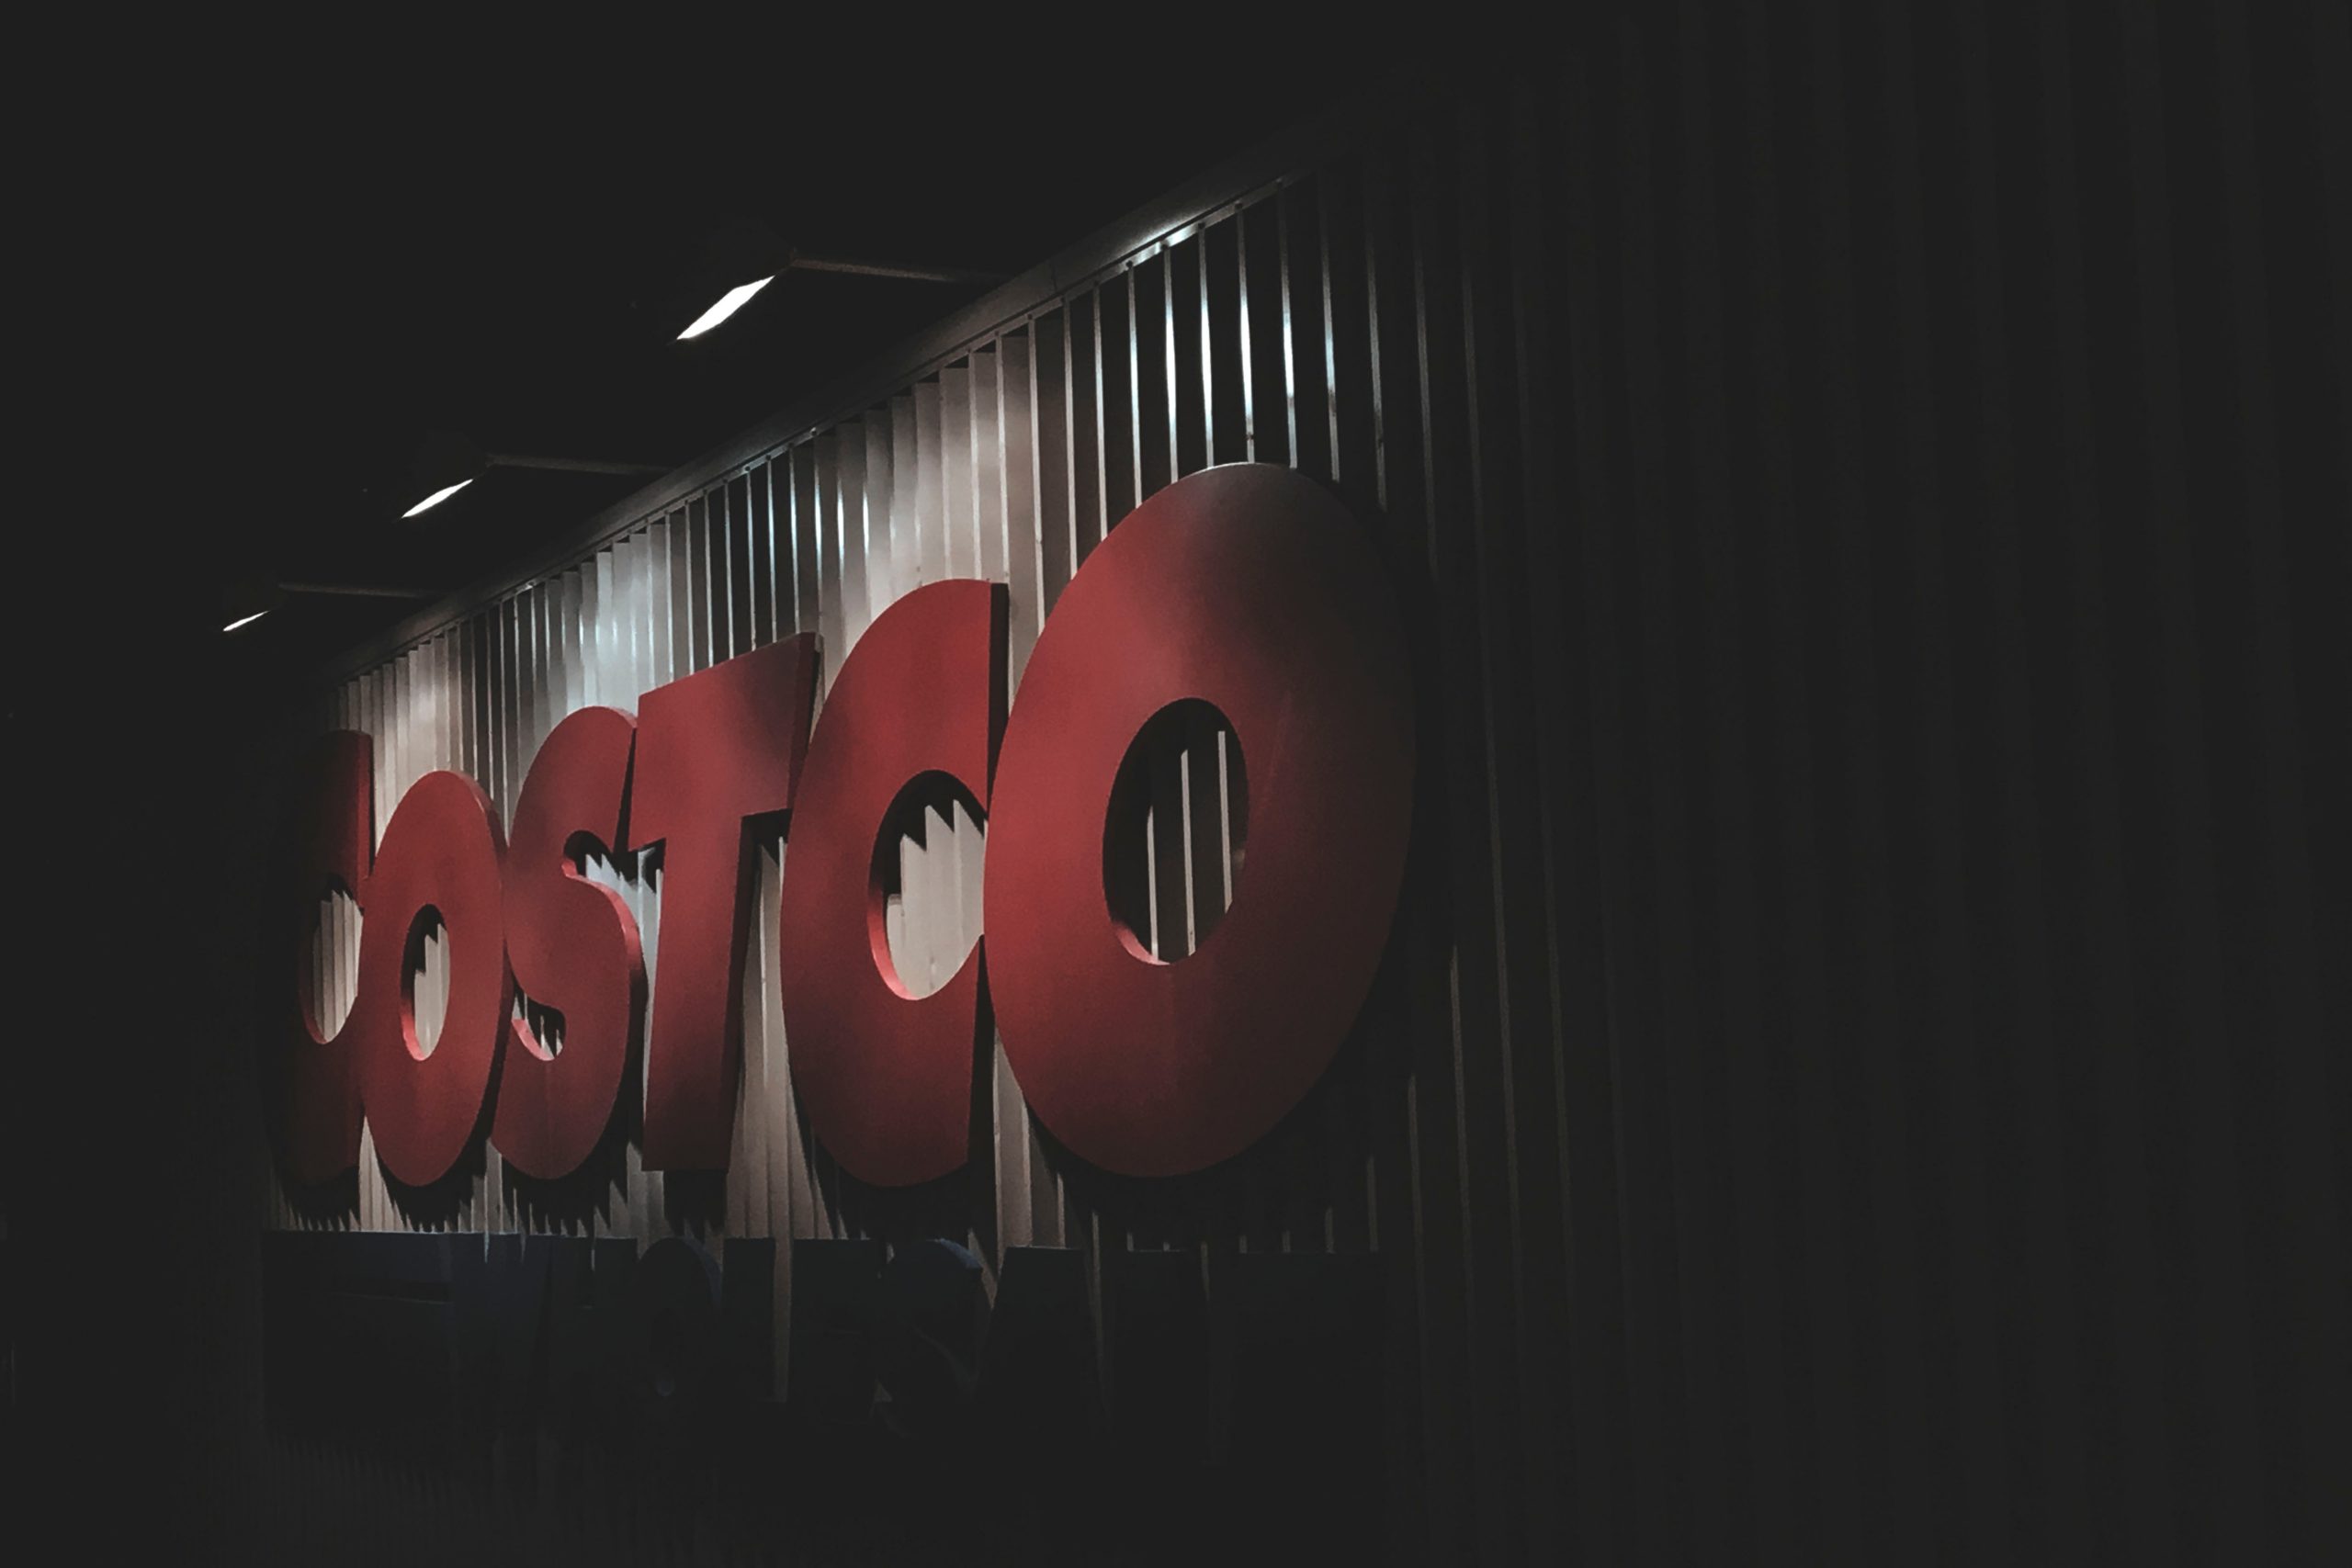 Costo credit card processing review – It’s just too expensive!